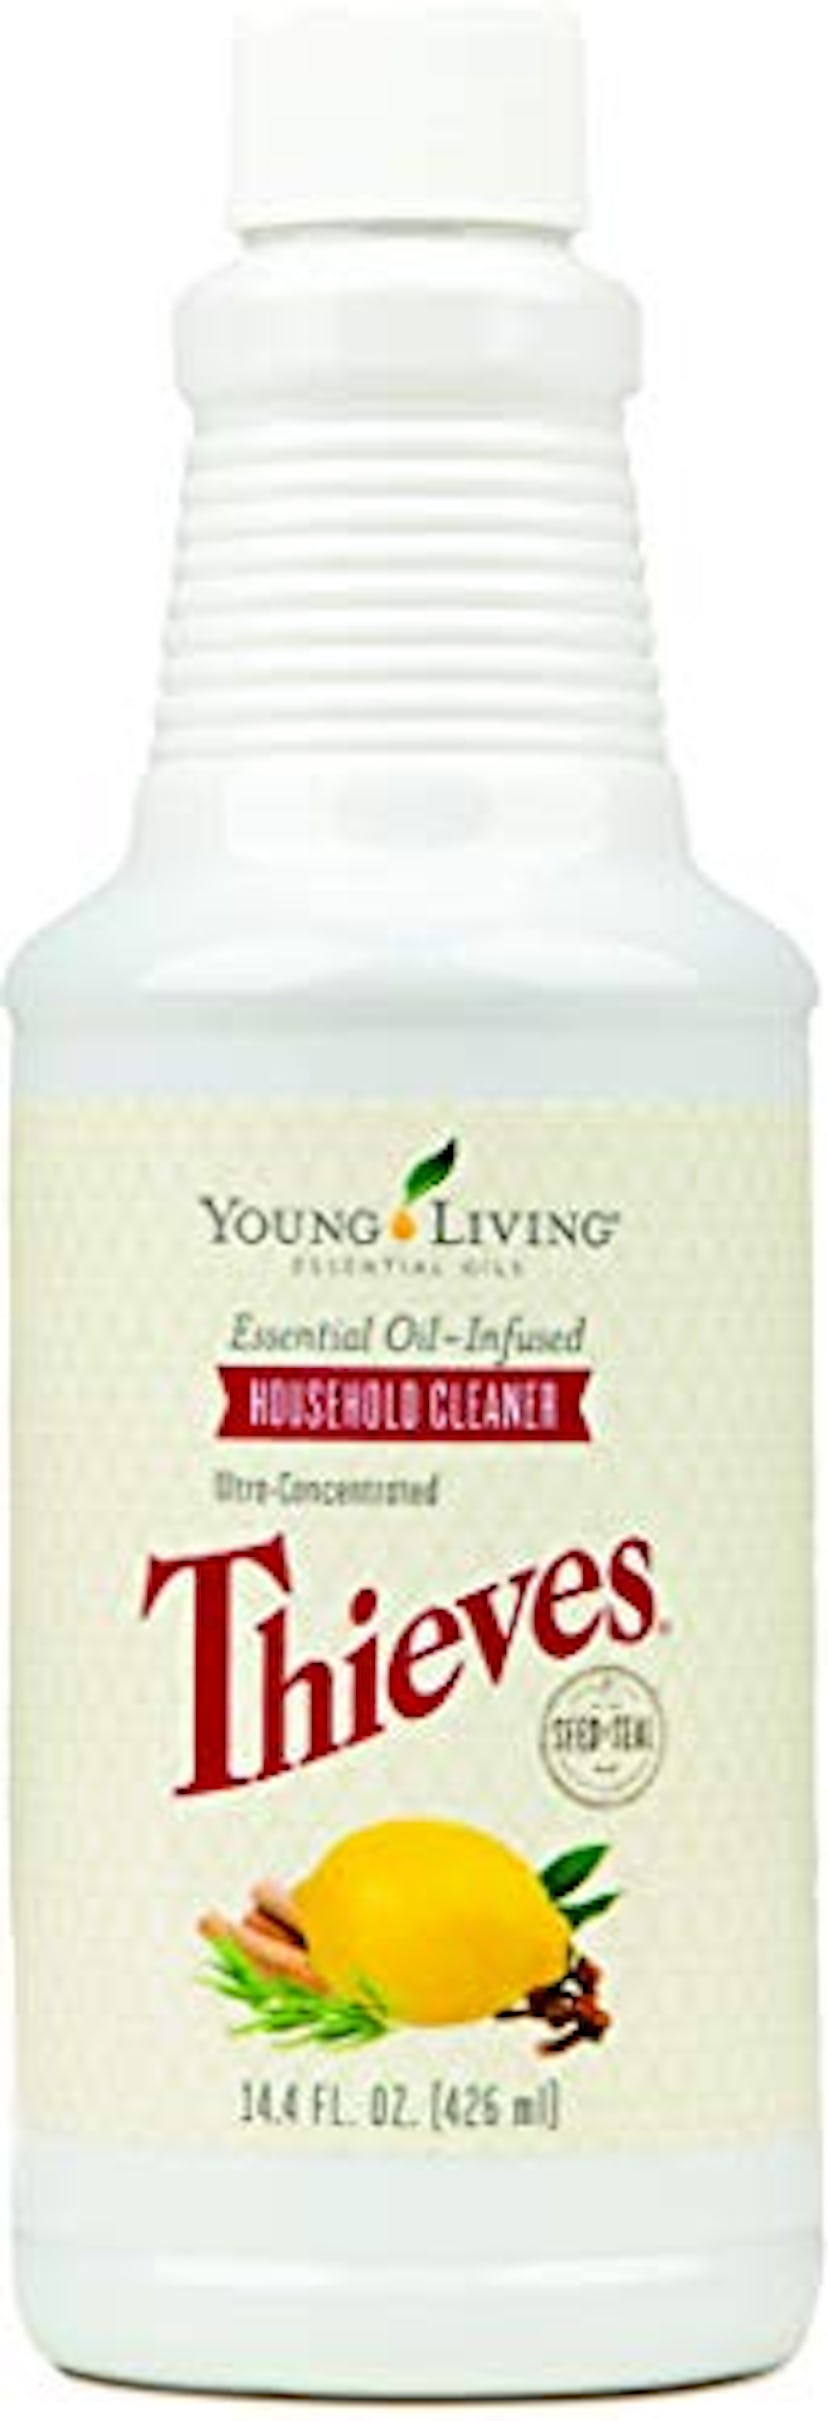  Click image to open expanded view Thieves Household Cleaner by Young Living